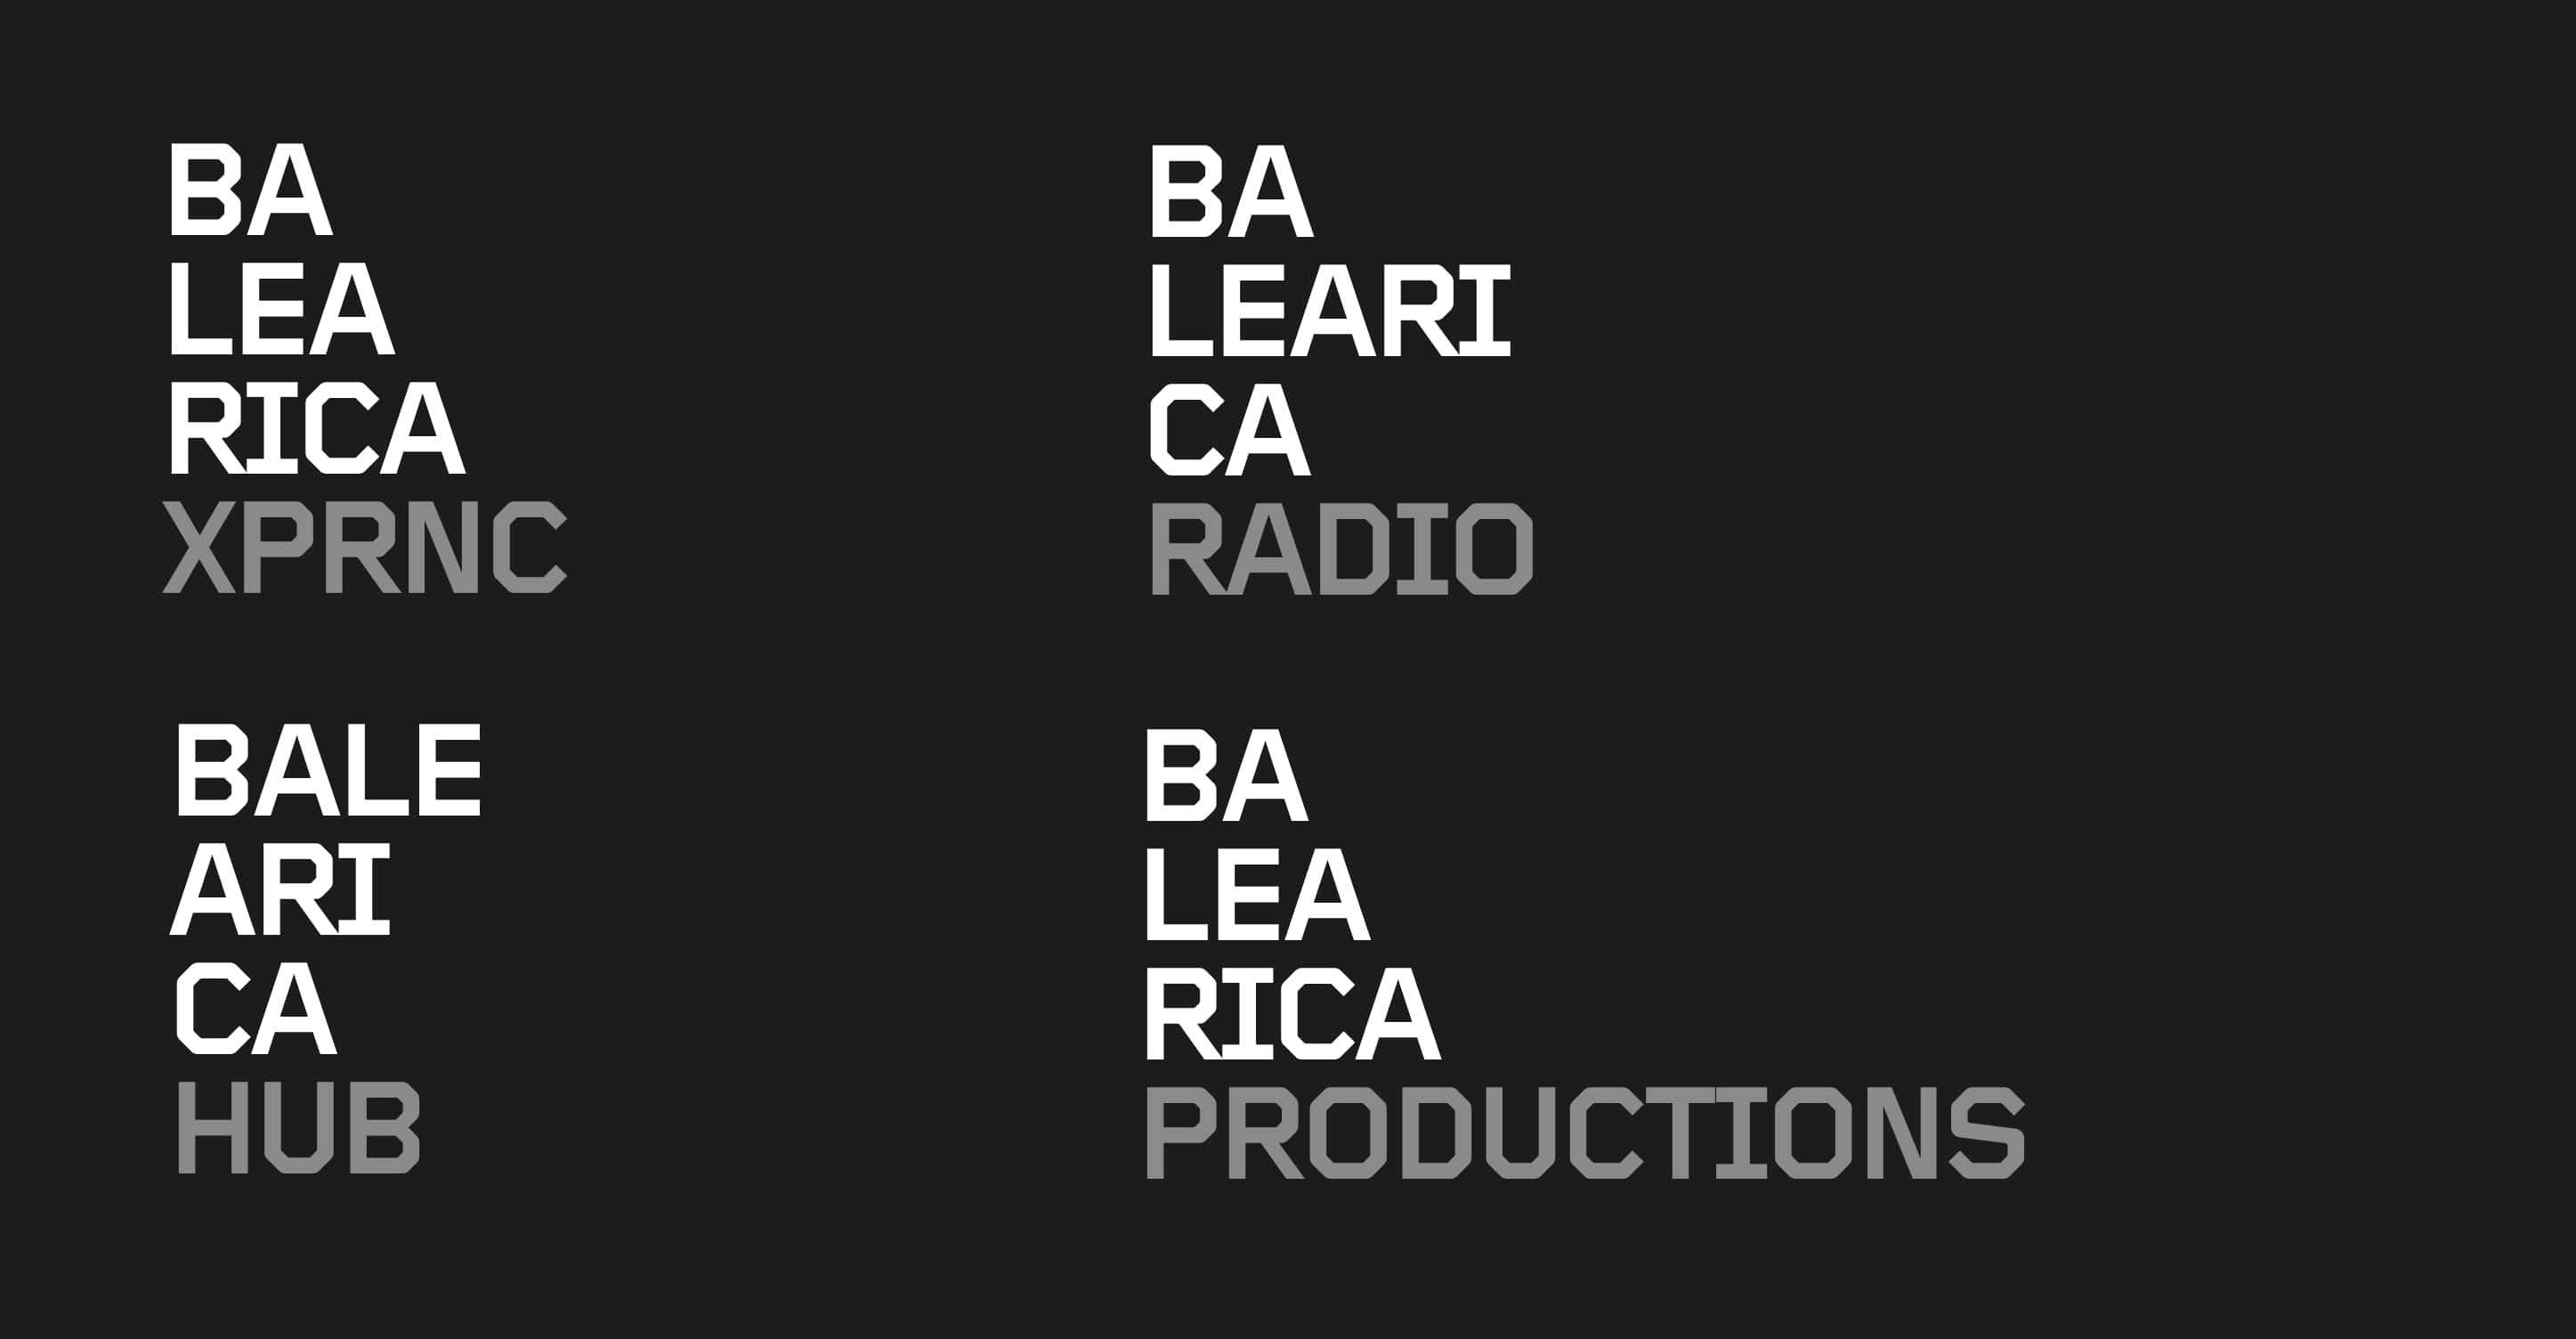 Balearica Brand Archytecure including Experience, Radio, Hub and Productions areas